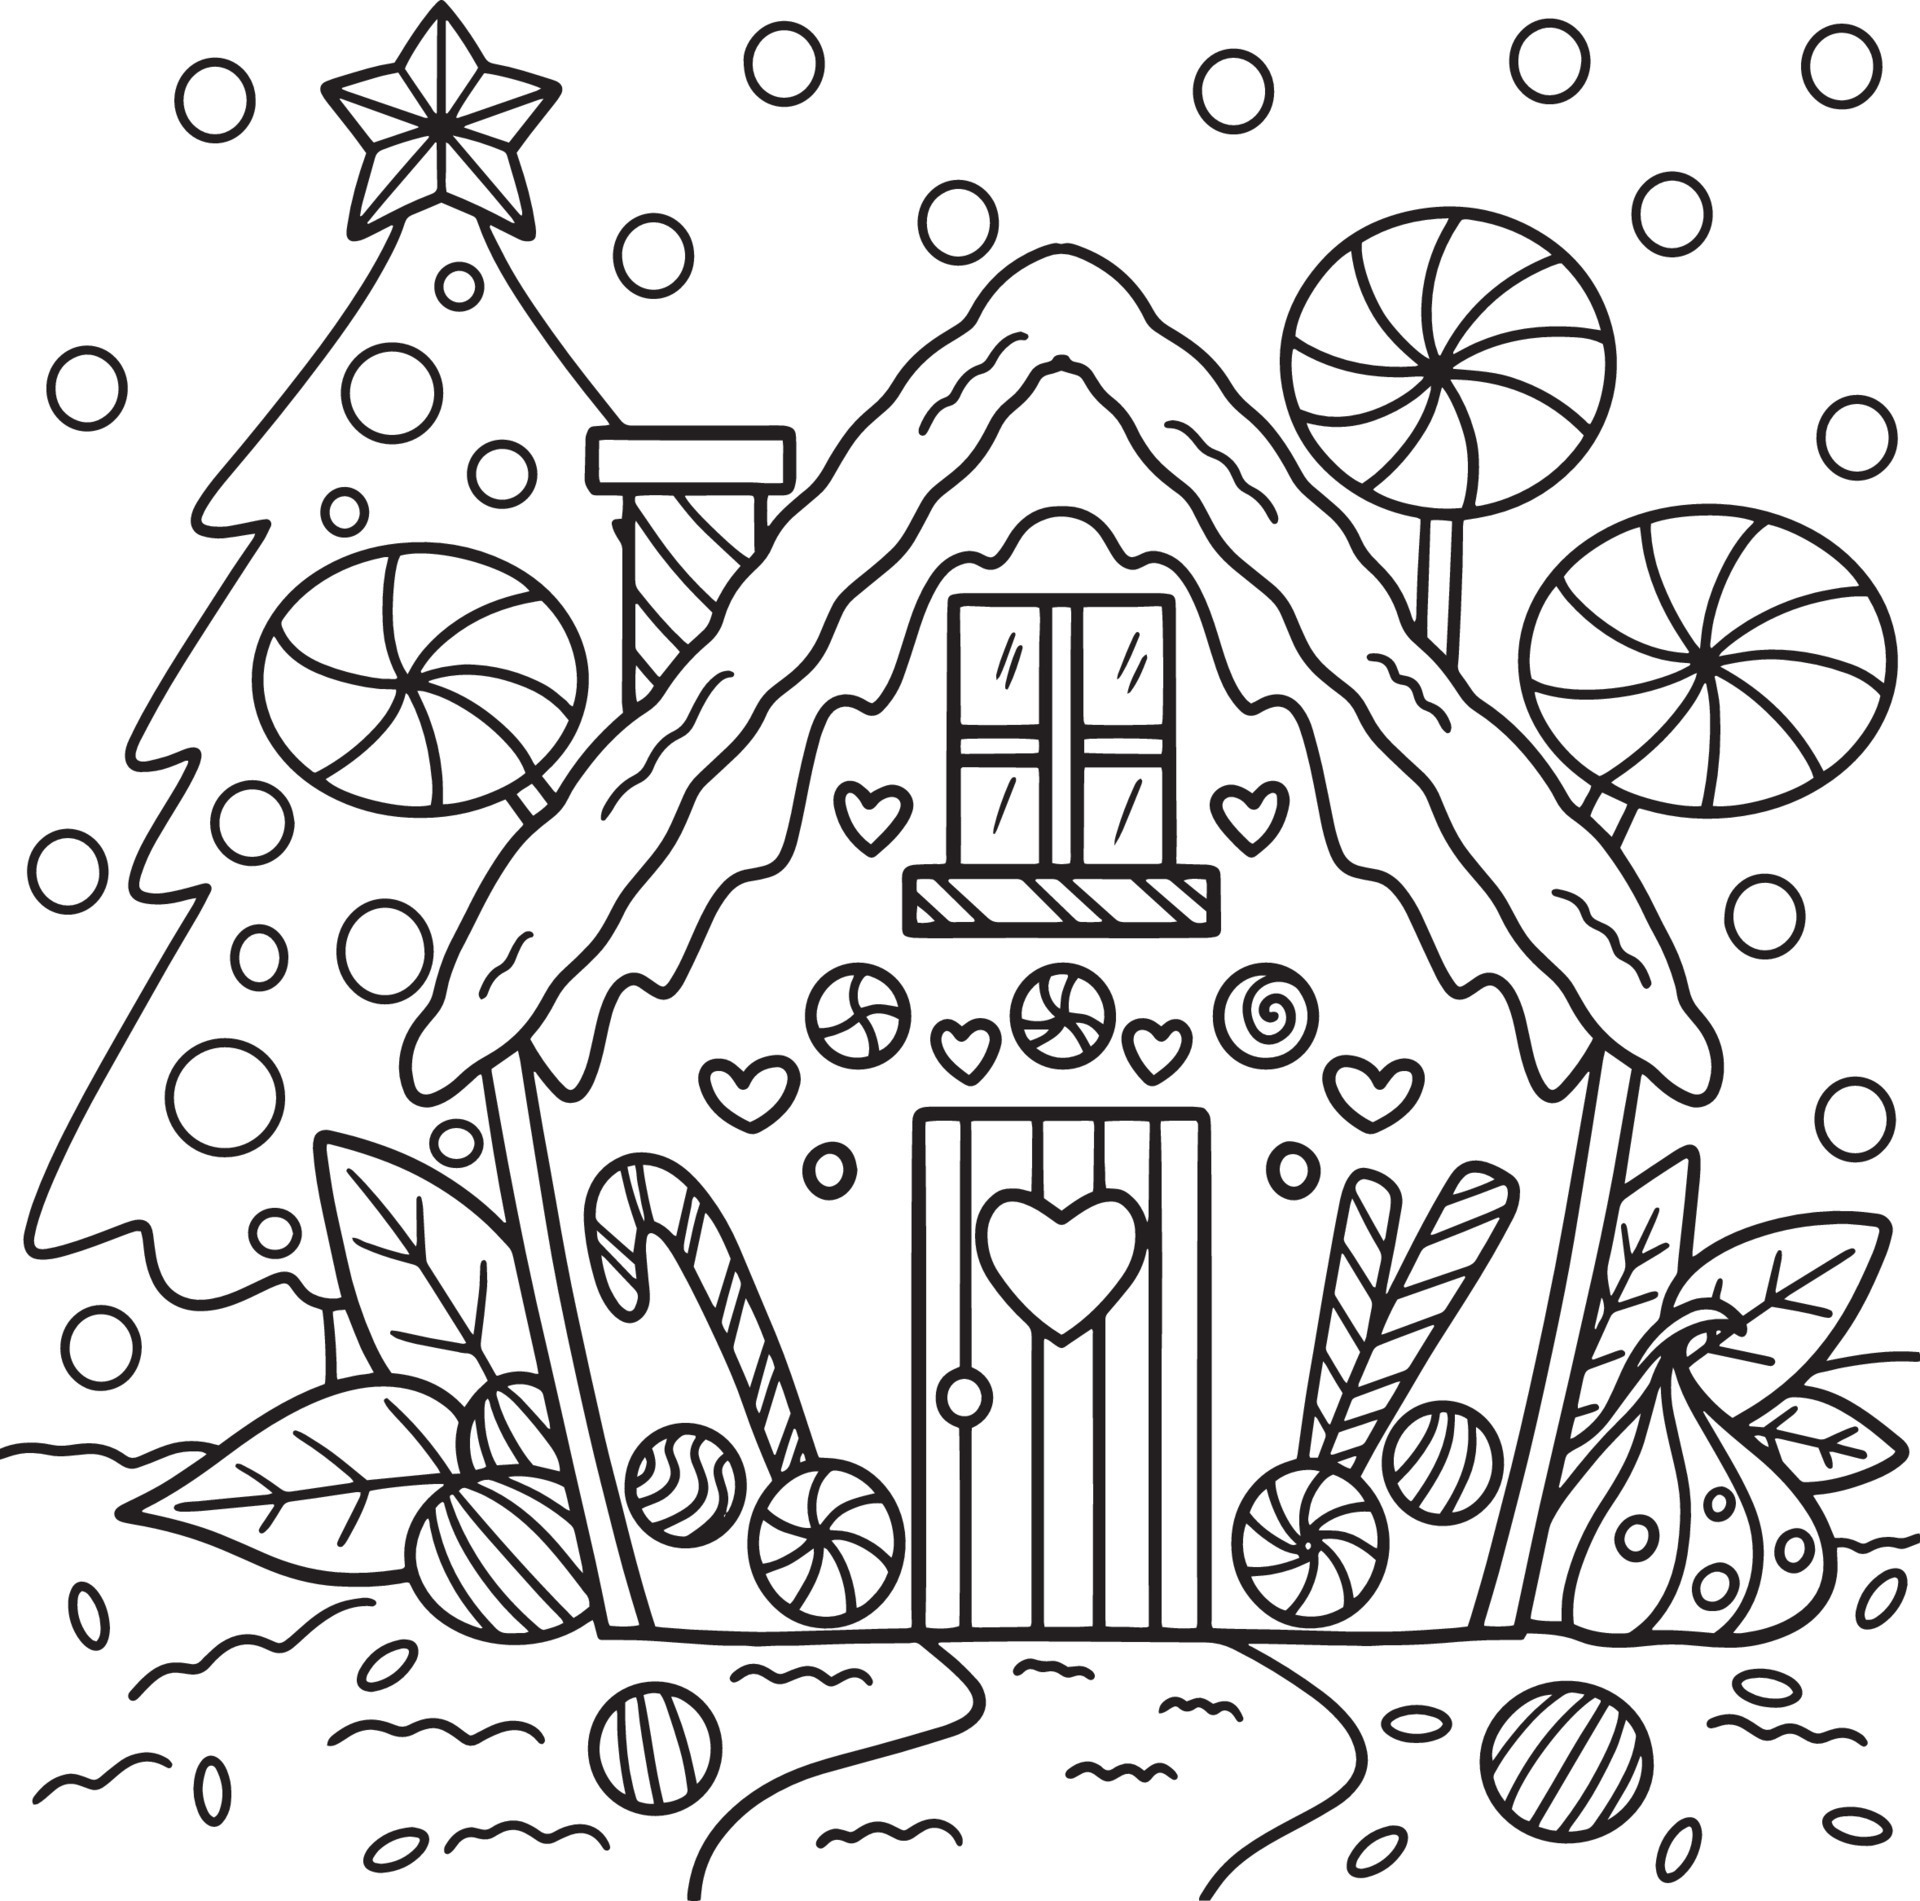 christmas-gingerbread-house-coloring-page-8944079-vector-art-at-vecteezy